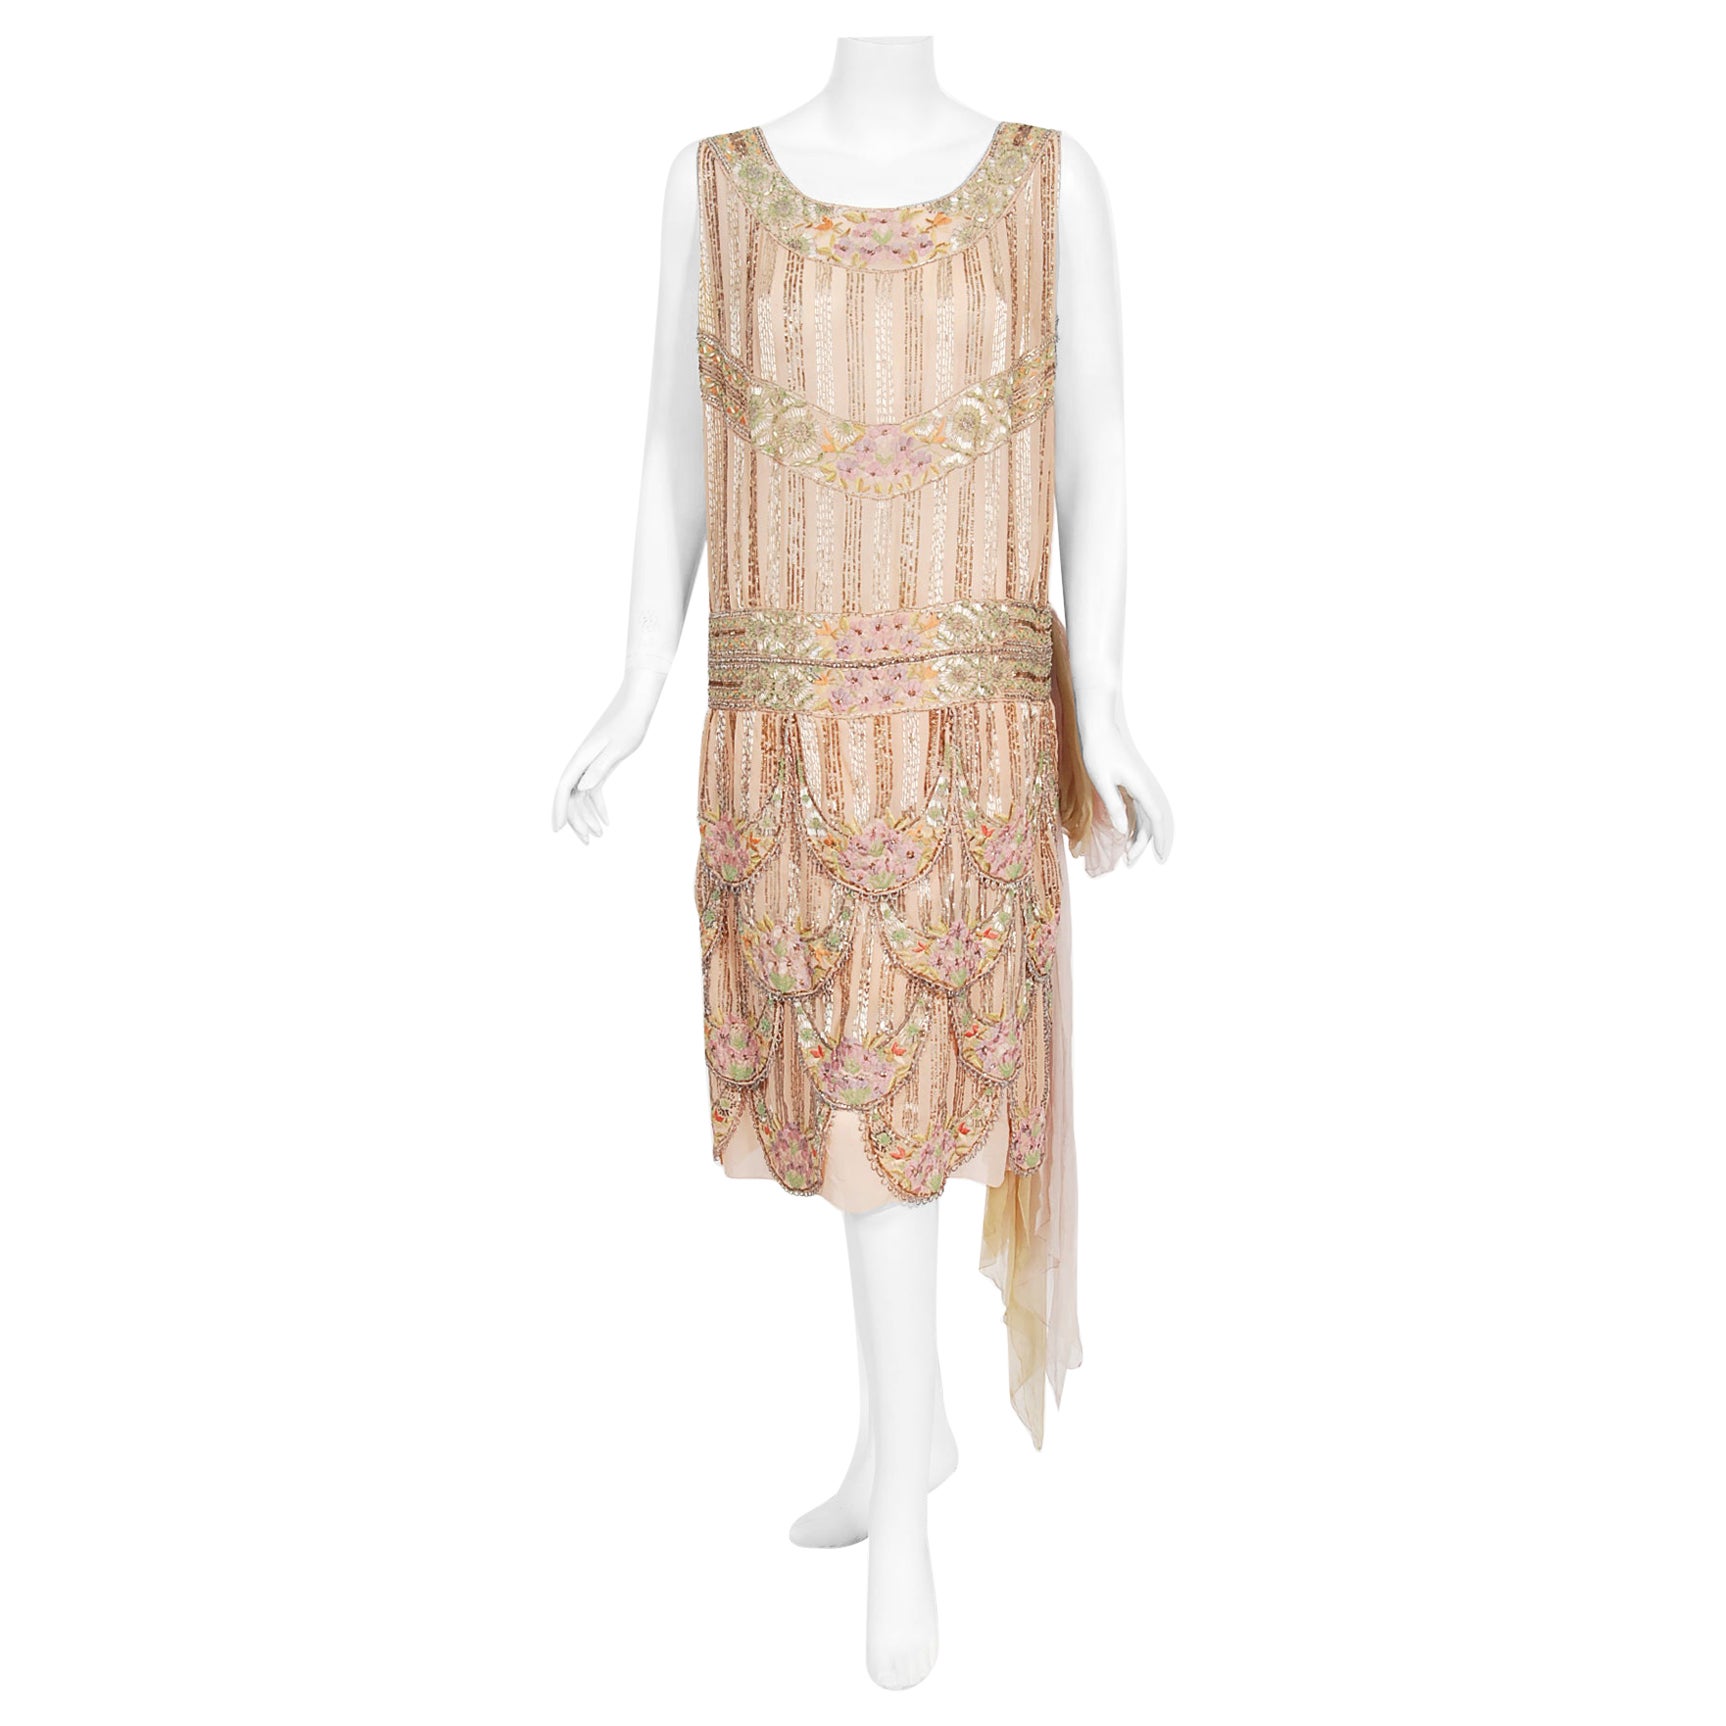 Gabrielle Chanel Chantilly Lace Evening Dress, Mid 1920s Auction